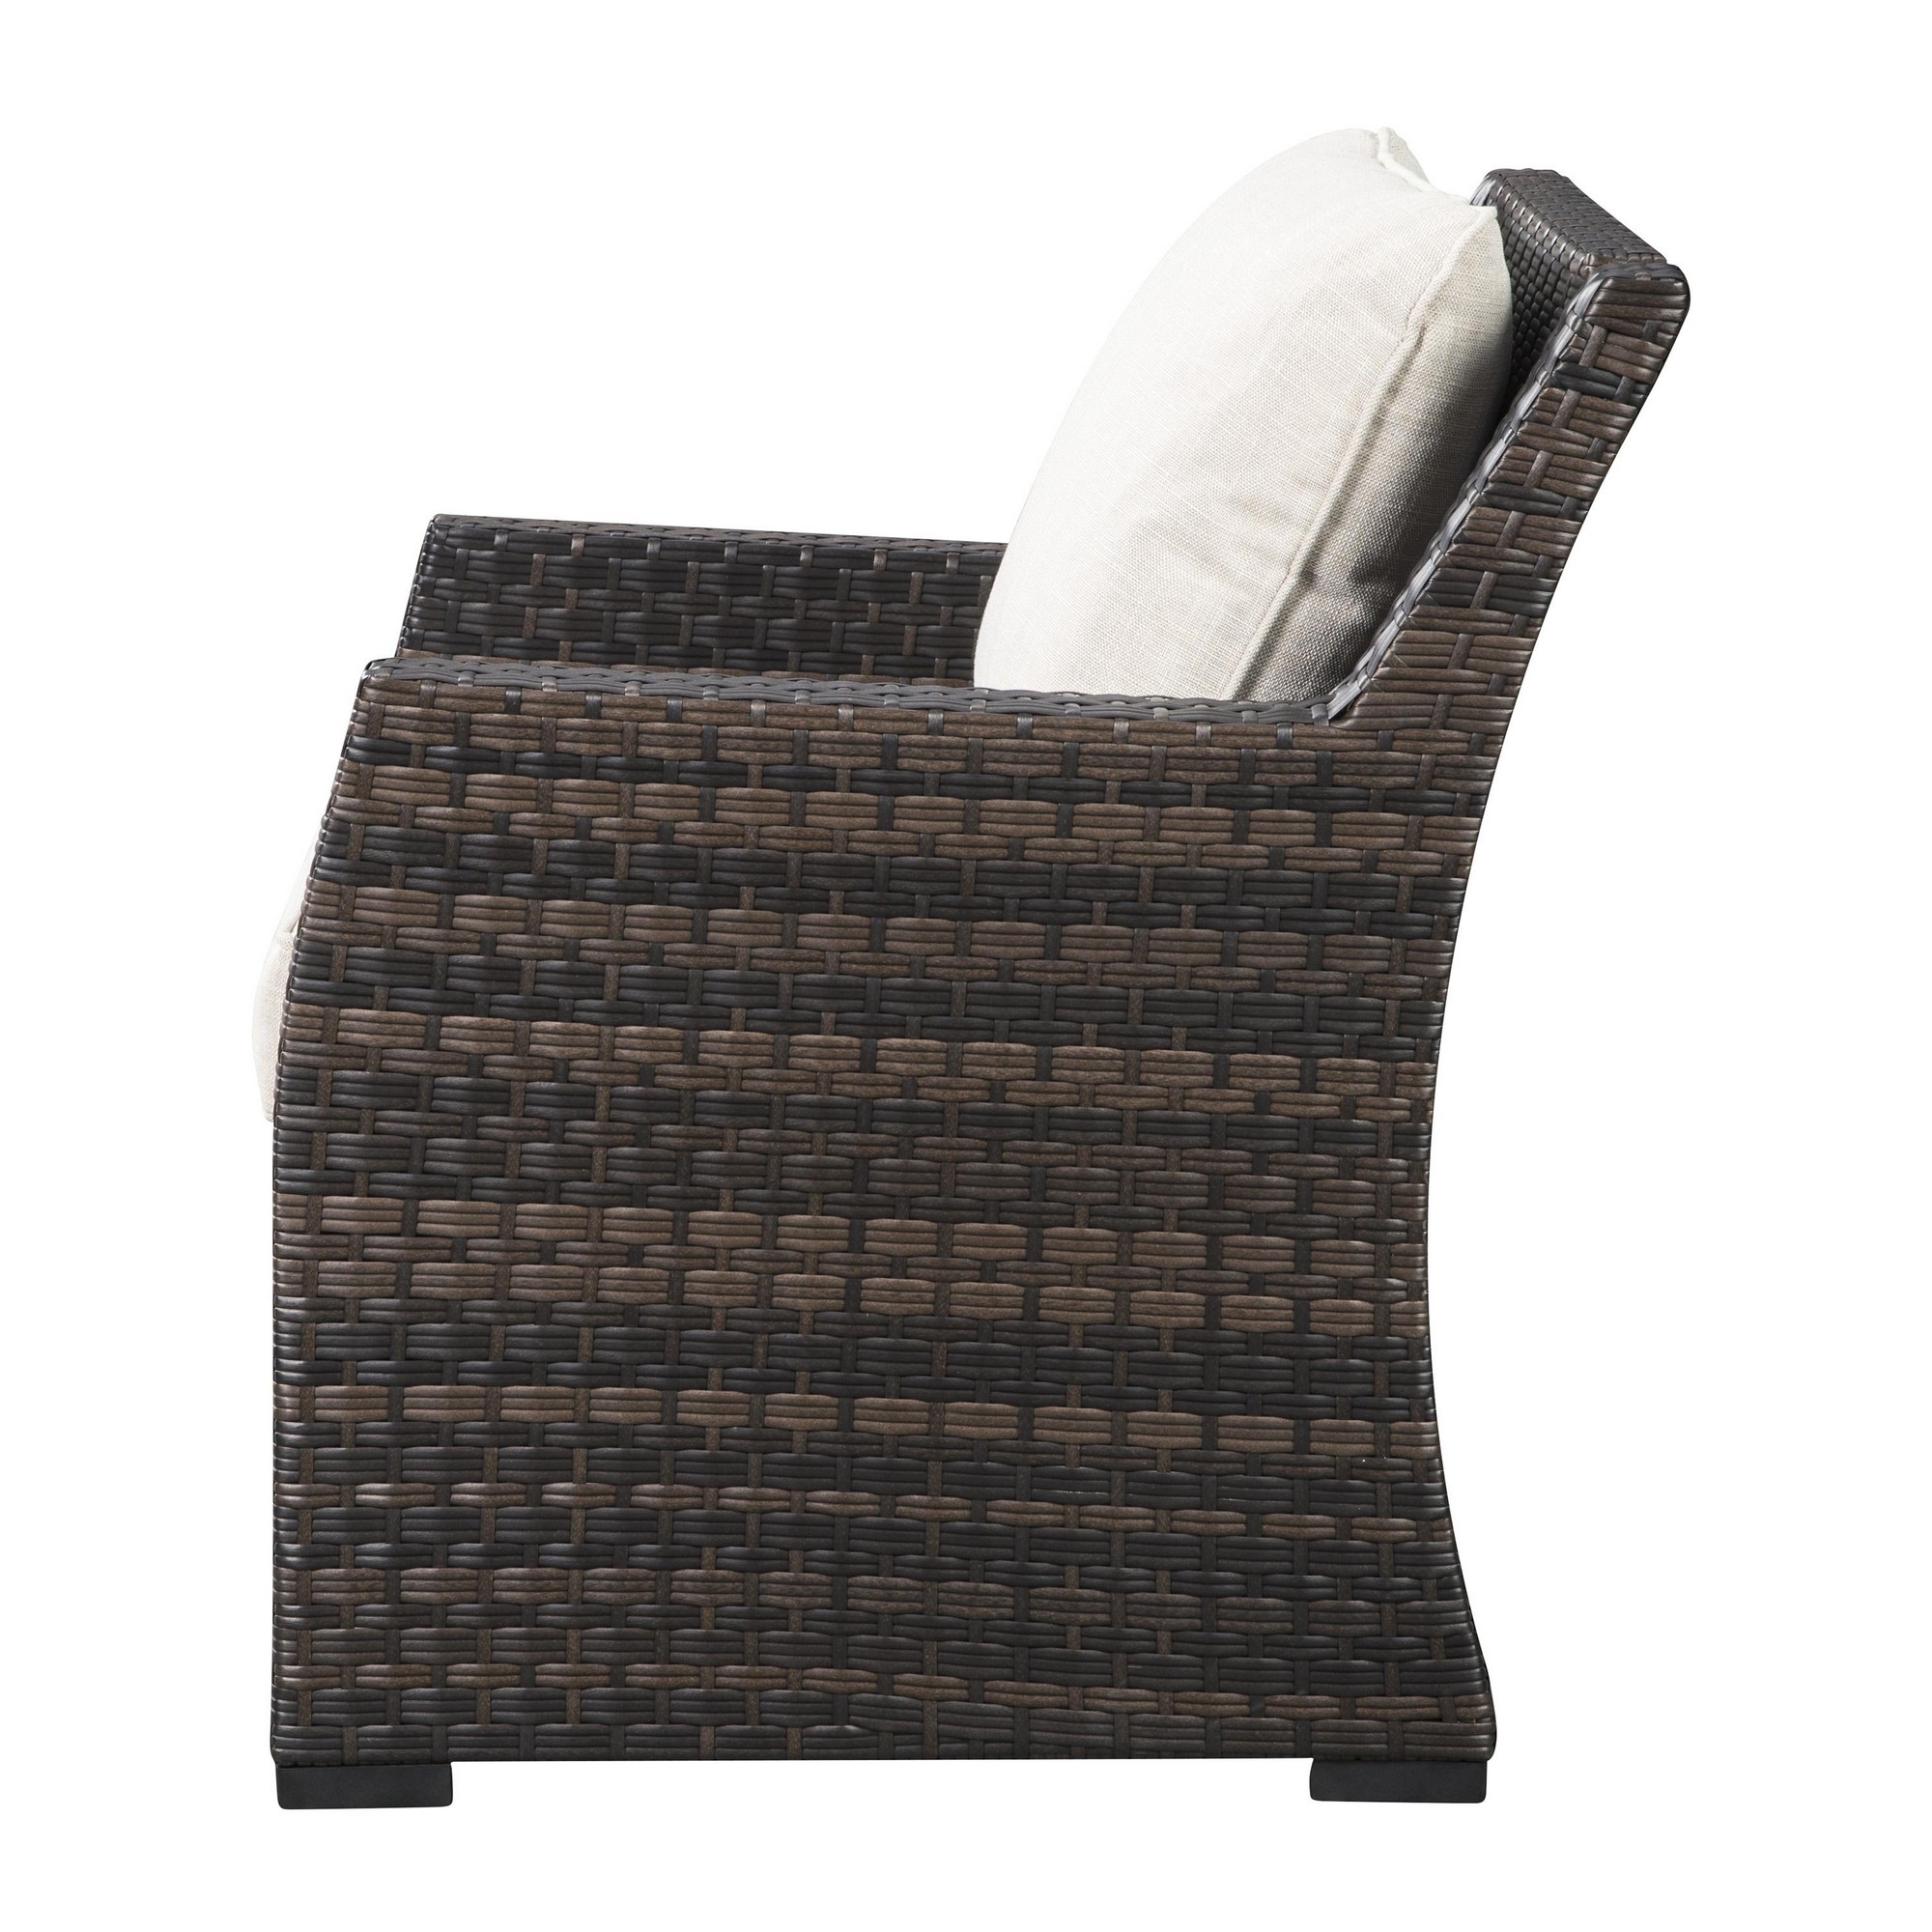 Resin Wicker Woven Lounge Chair With Track Arms, Brown And Beige- Saltoro Sherpi